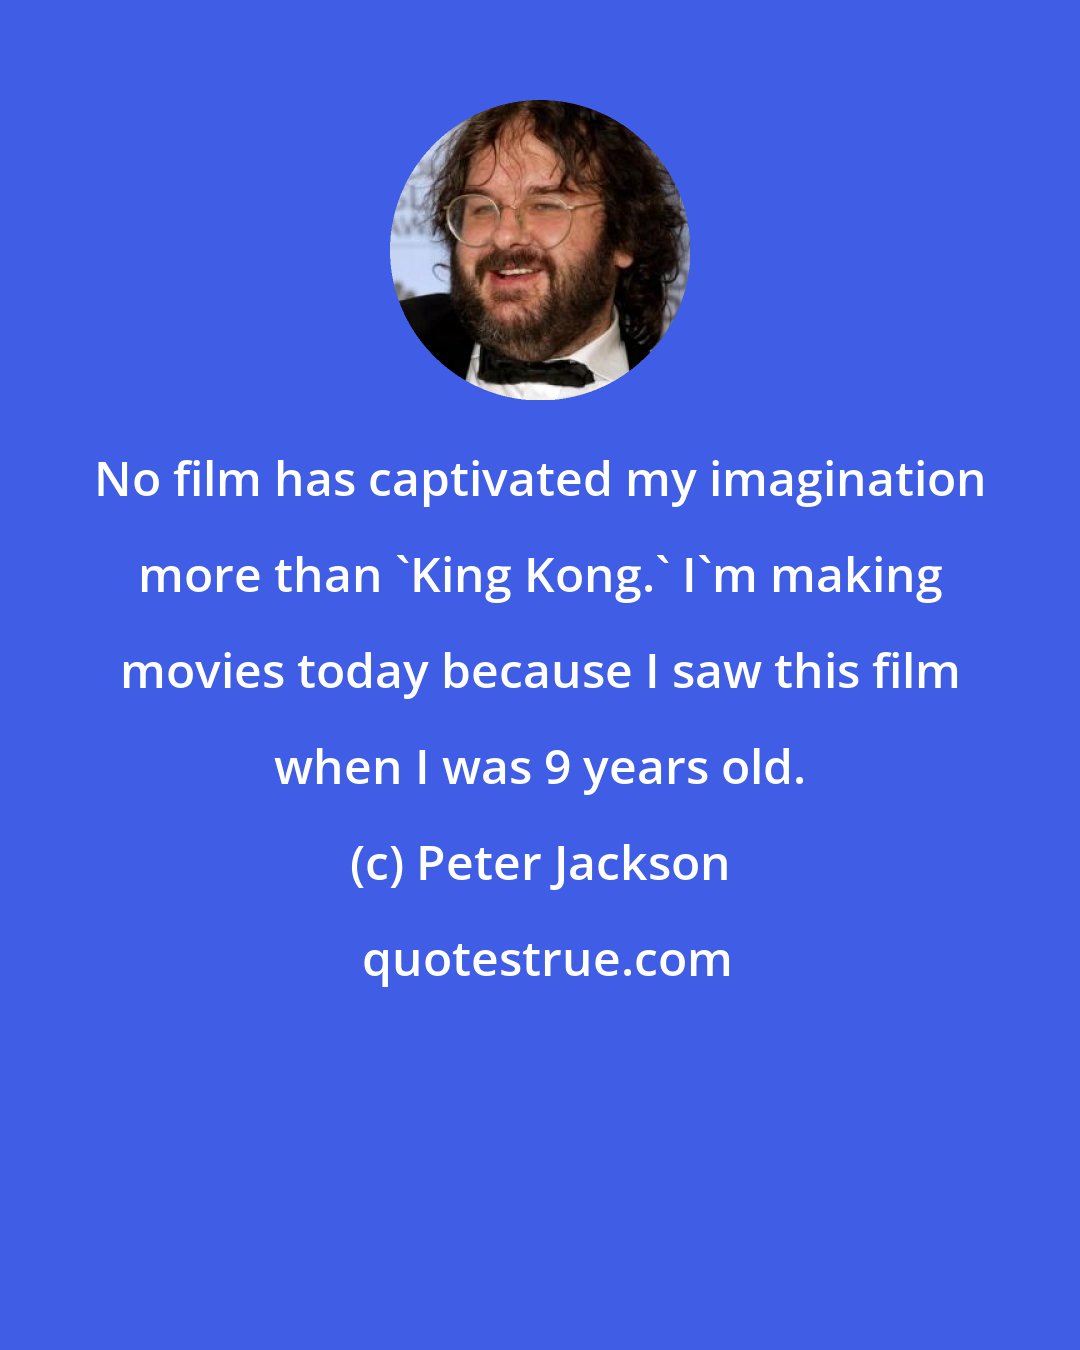 Peter Jackson: No film has captivated my imagination more than 'King Kong.' I'm making movies today because I saw this film when I was 9 years old.